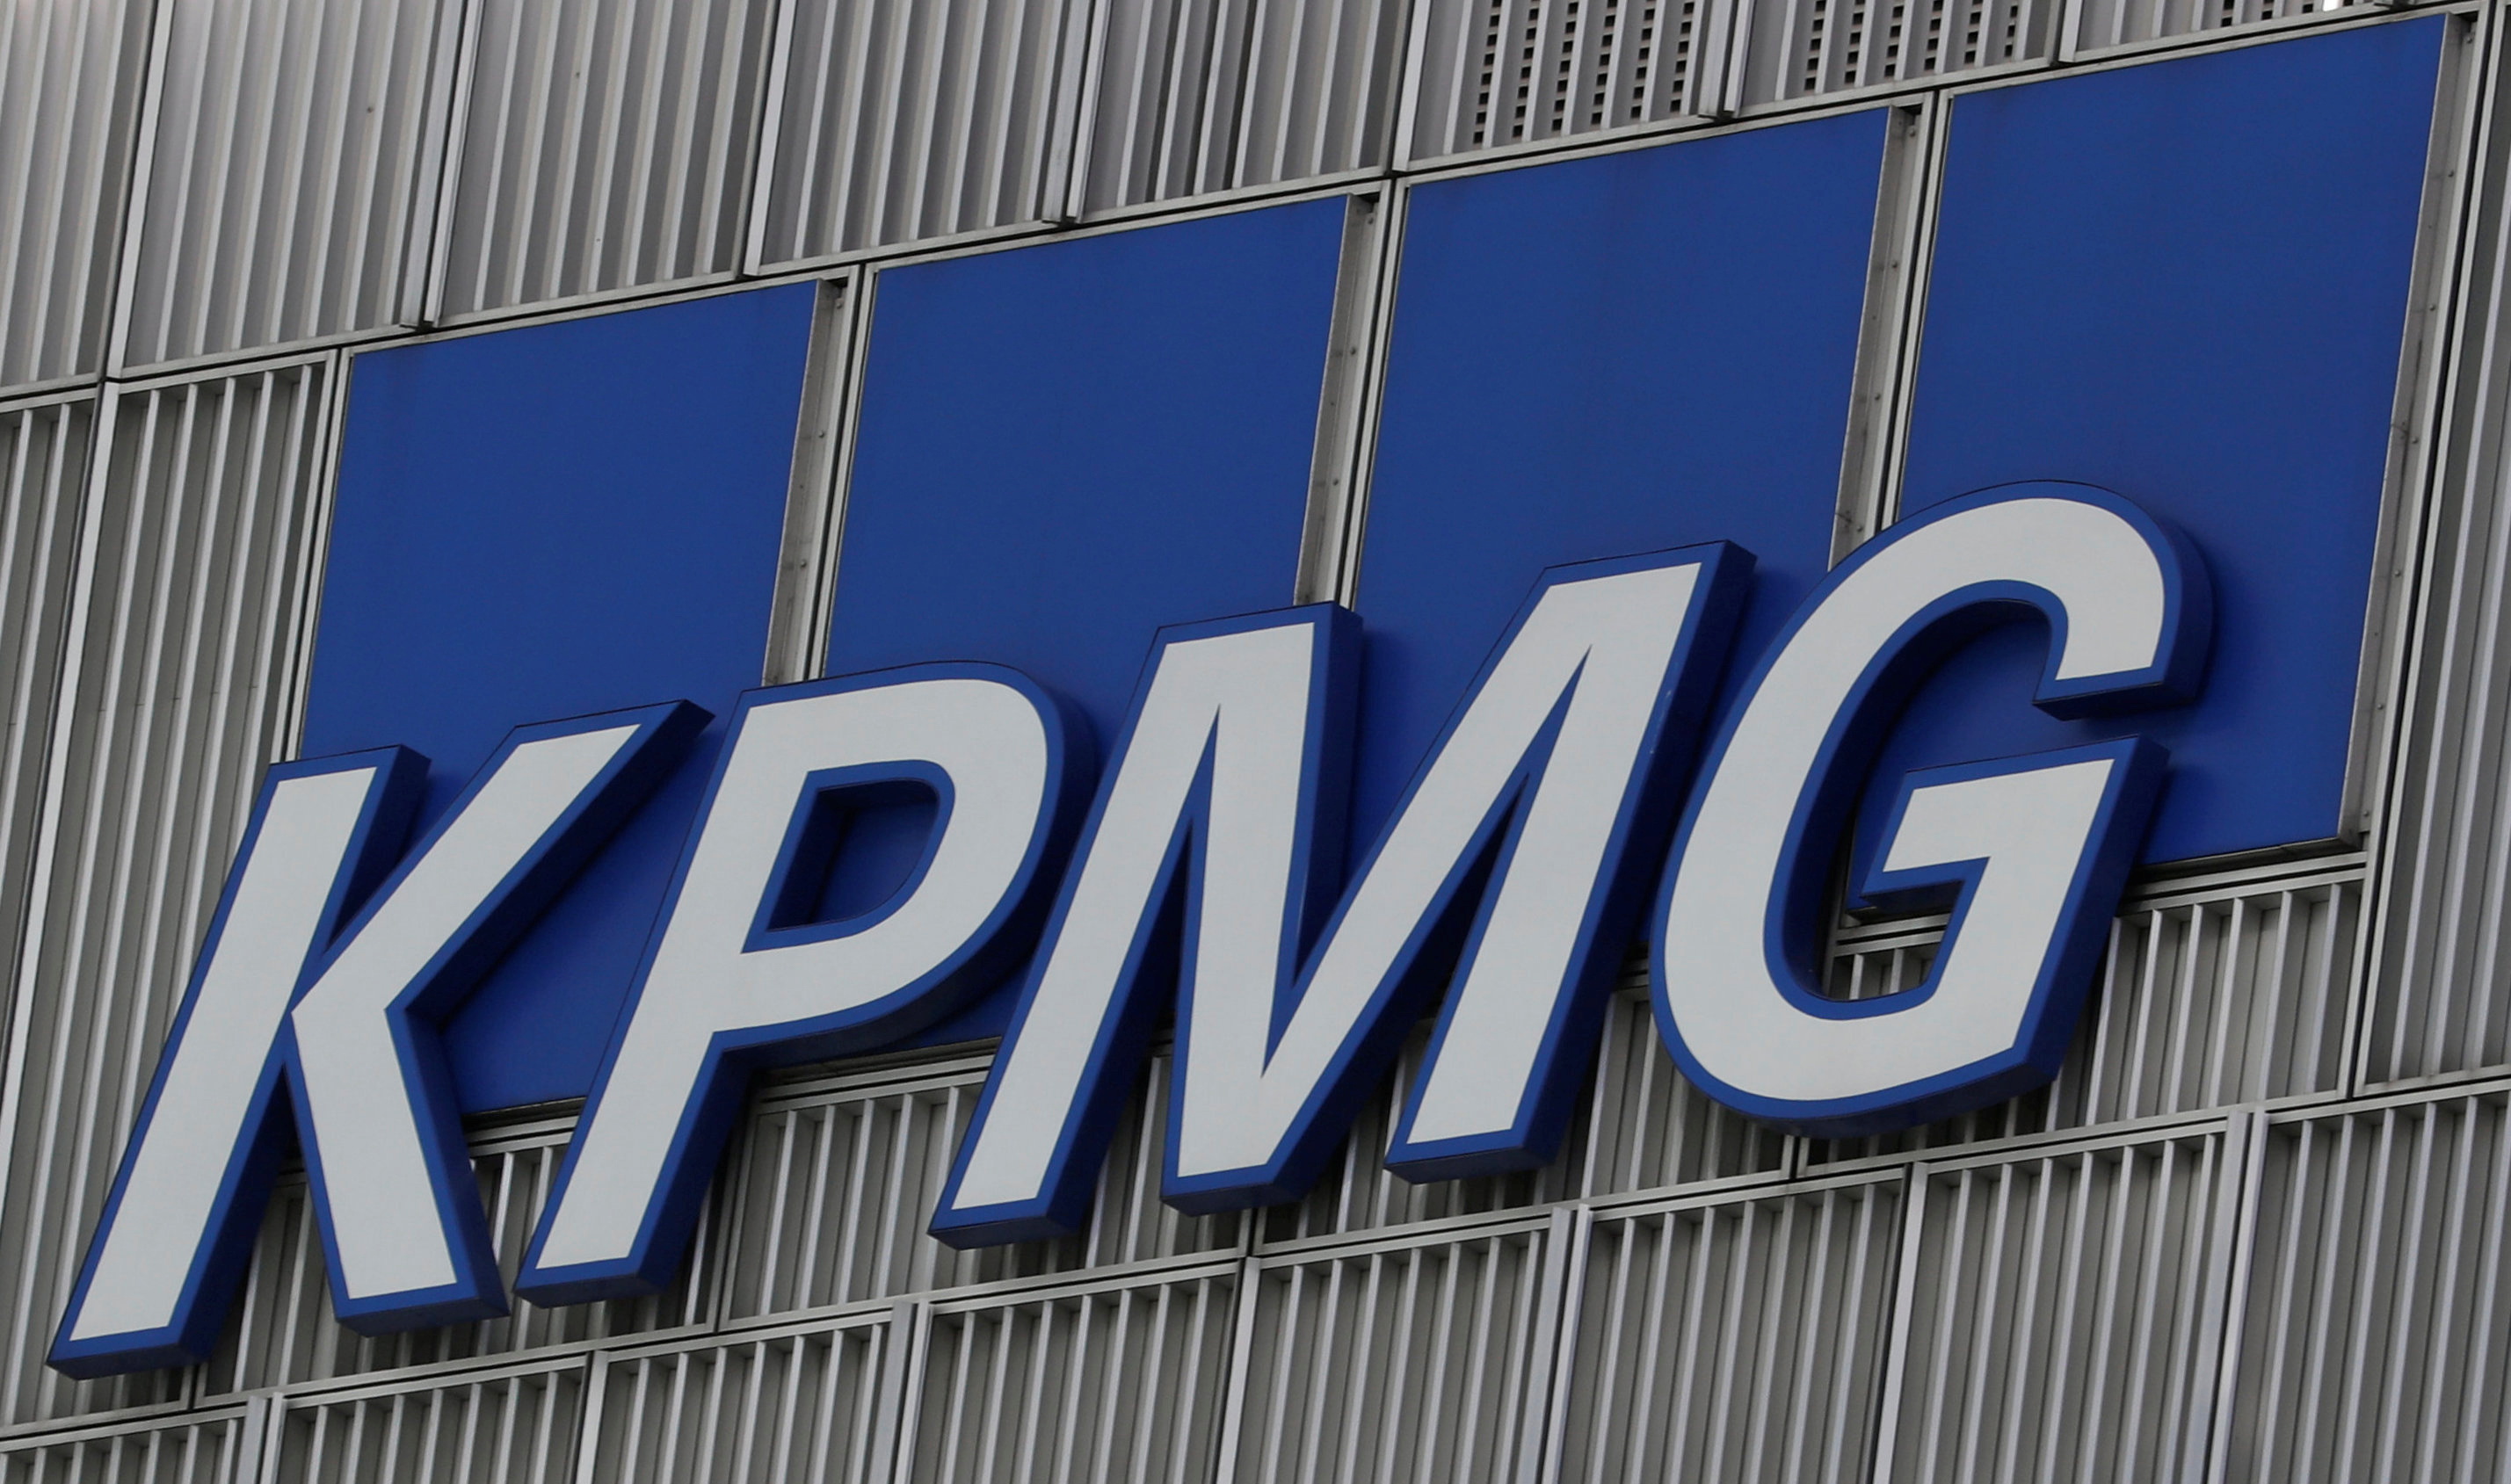 The KPMG logo is seen at their offices at Canary Wharf financial district in London